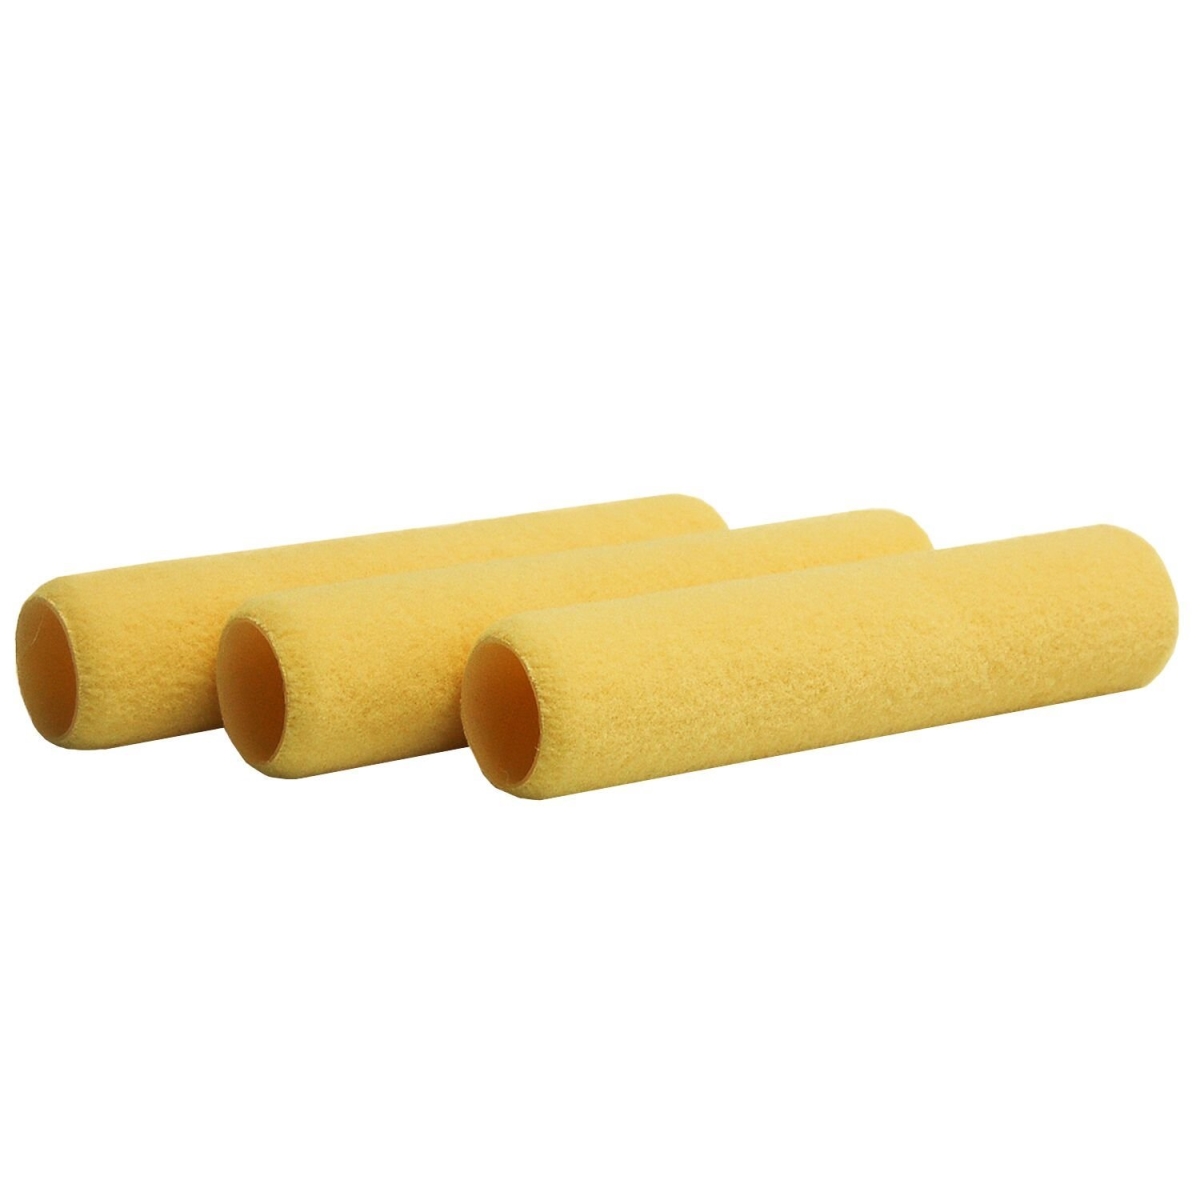 211674 9 In. One Coat Smooth Roller 0.5 In. Nap Covers In Display Box Pack Of 36